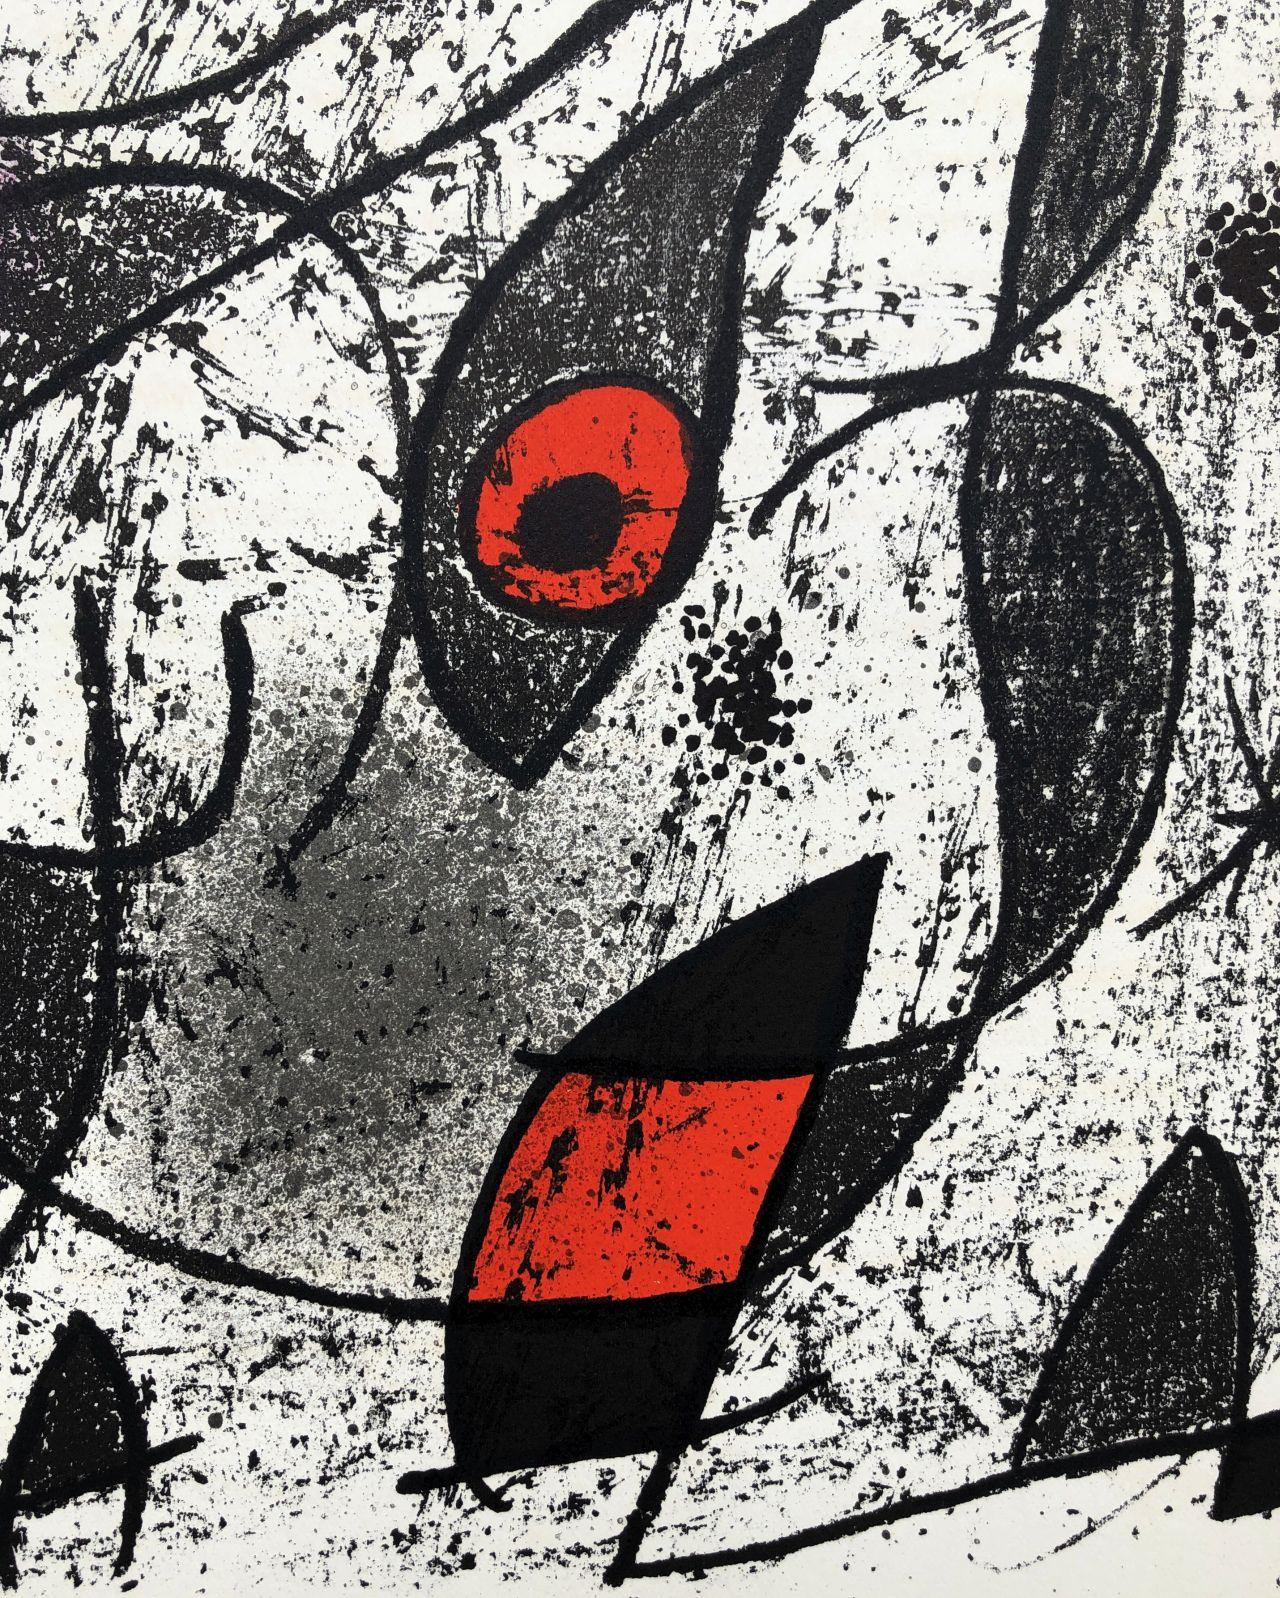 Two Flying Birds - Original Lithograph (Mourlot #838) - Abstract Expressionist Print by Joan Miró